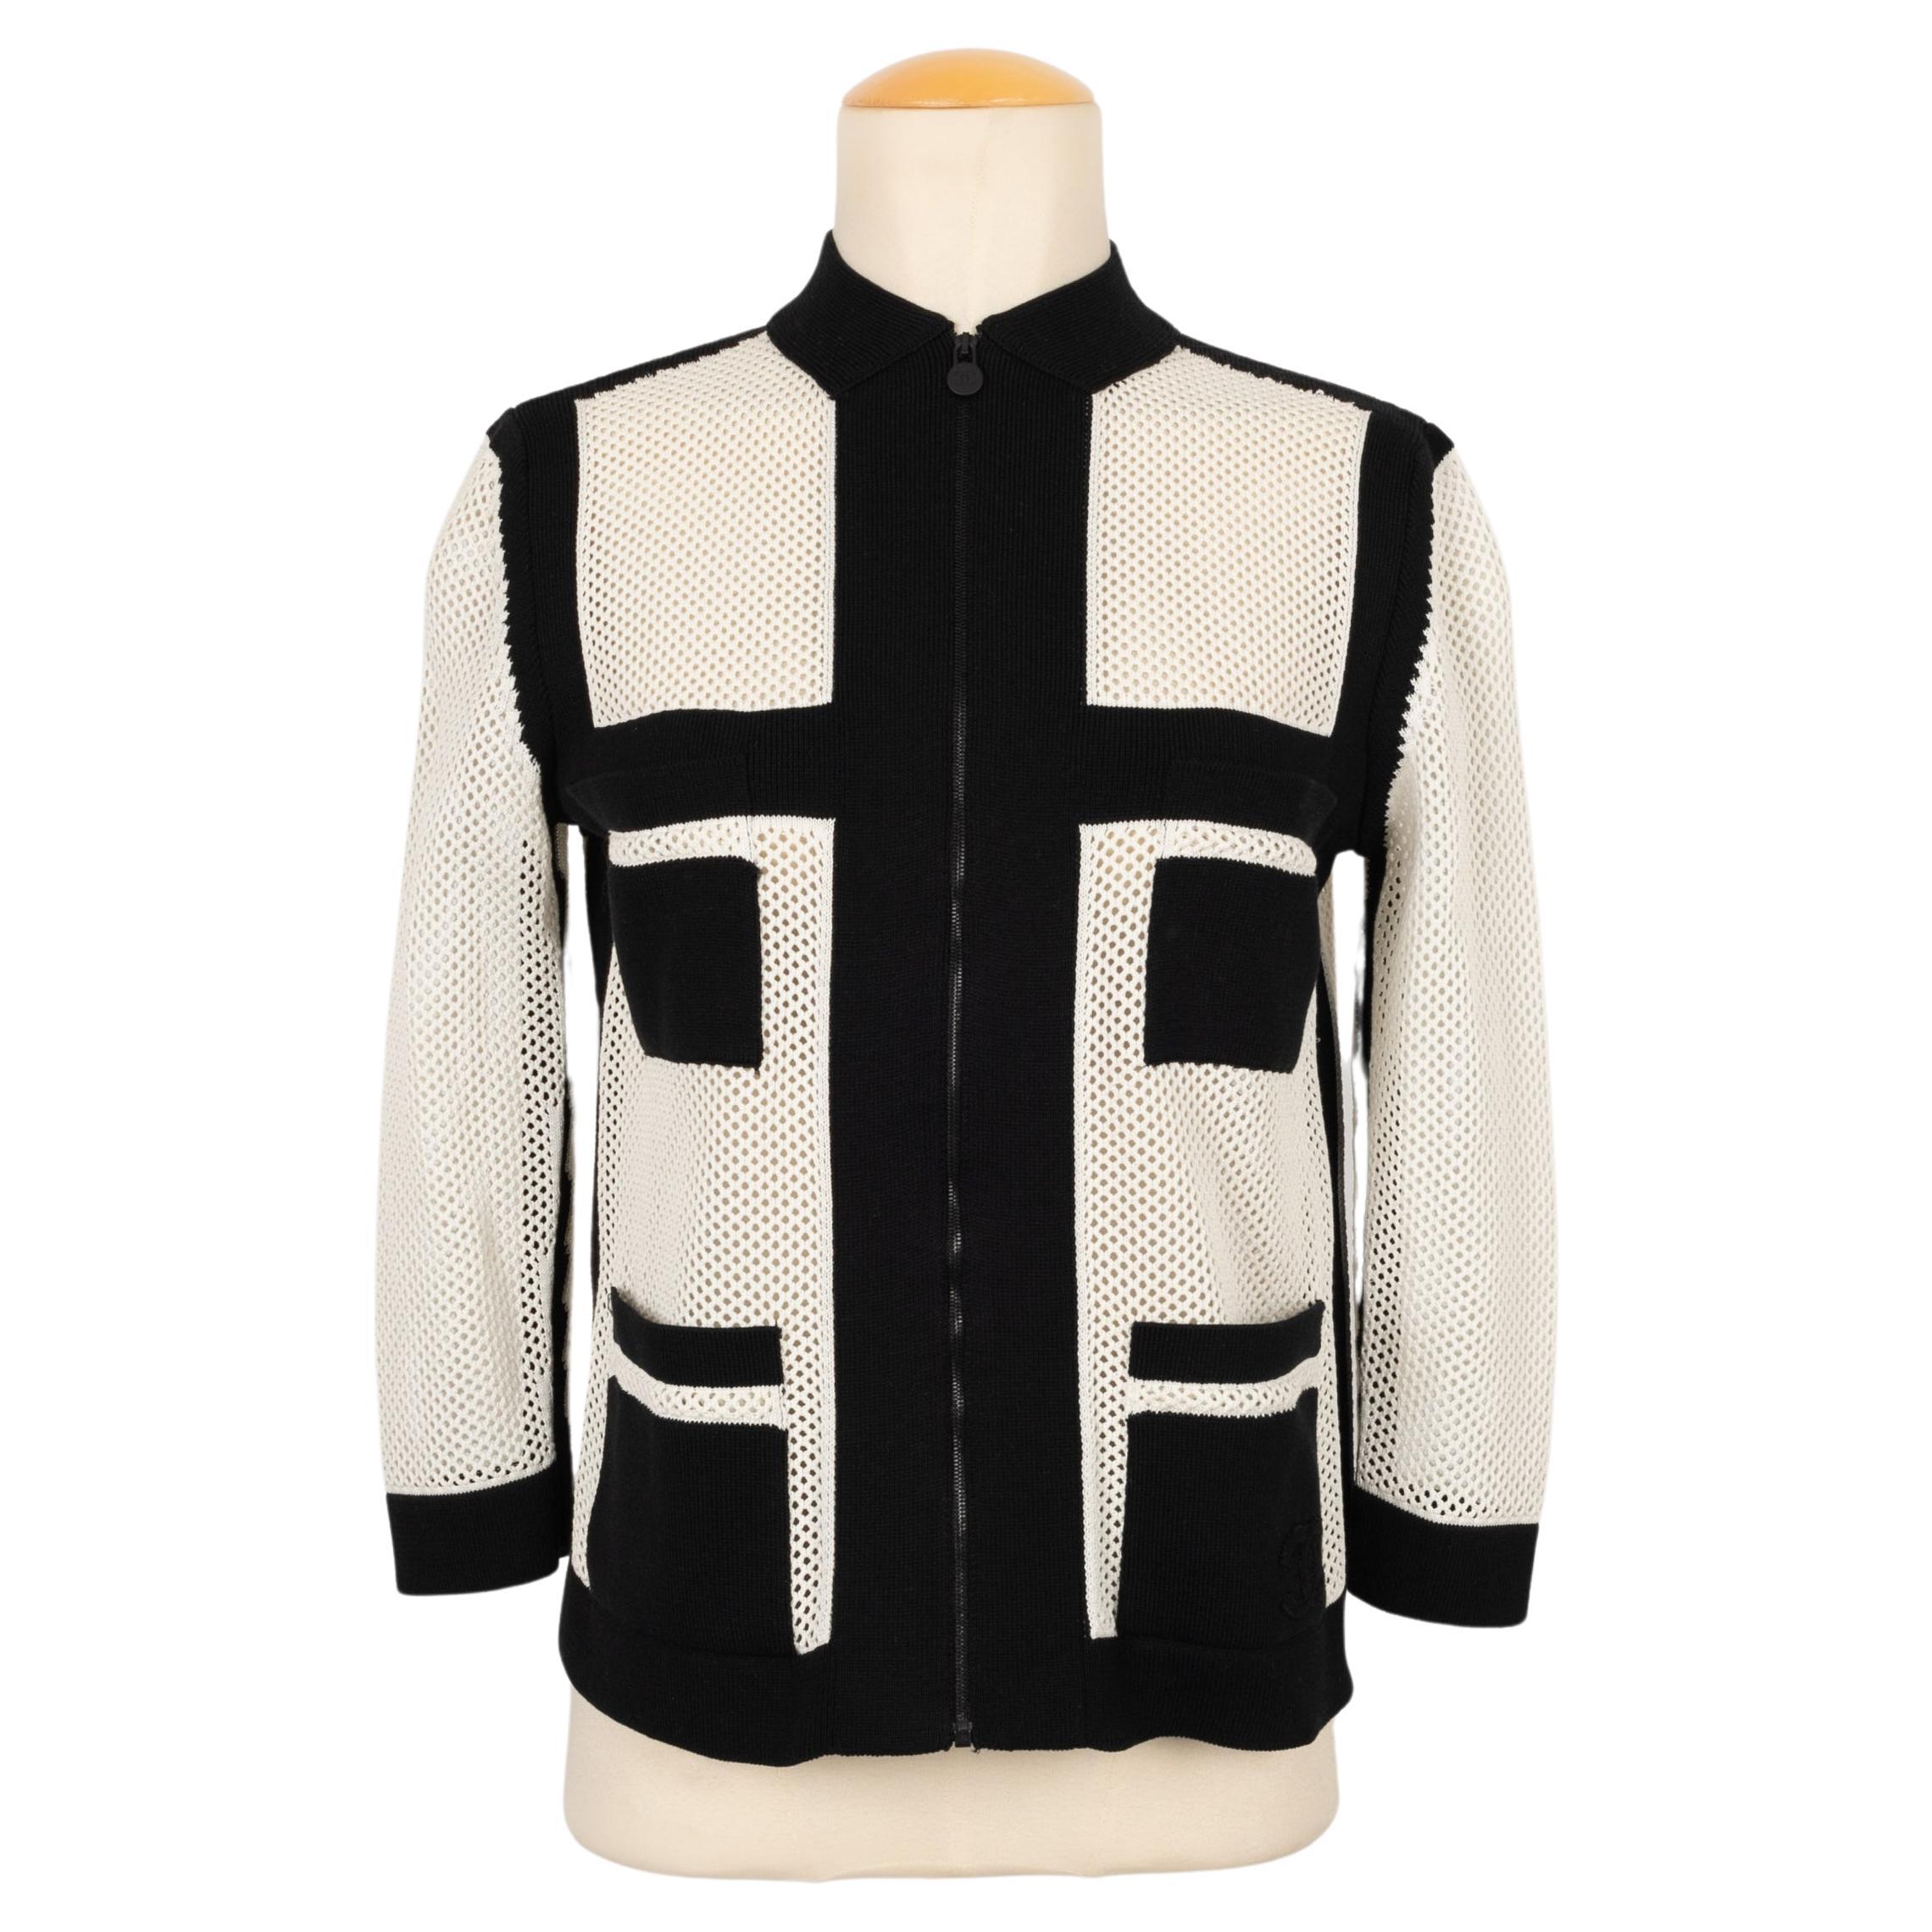 Chanel Jacket-Style Zipped Top in Black and White Mesh